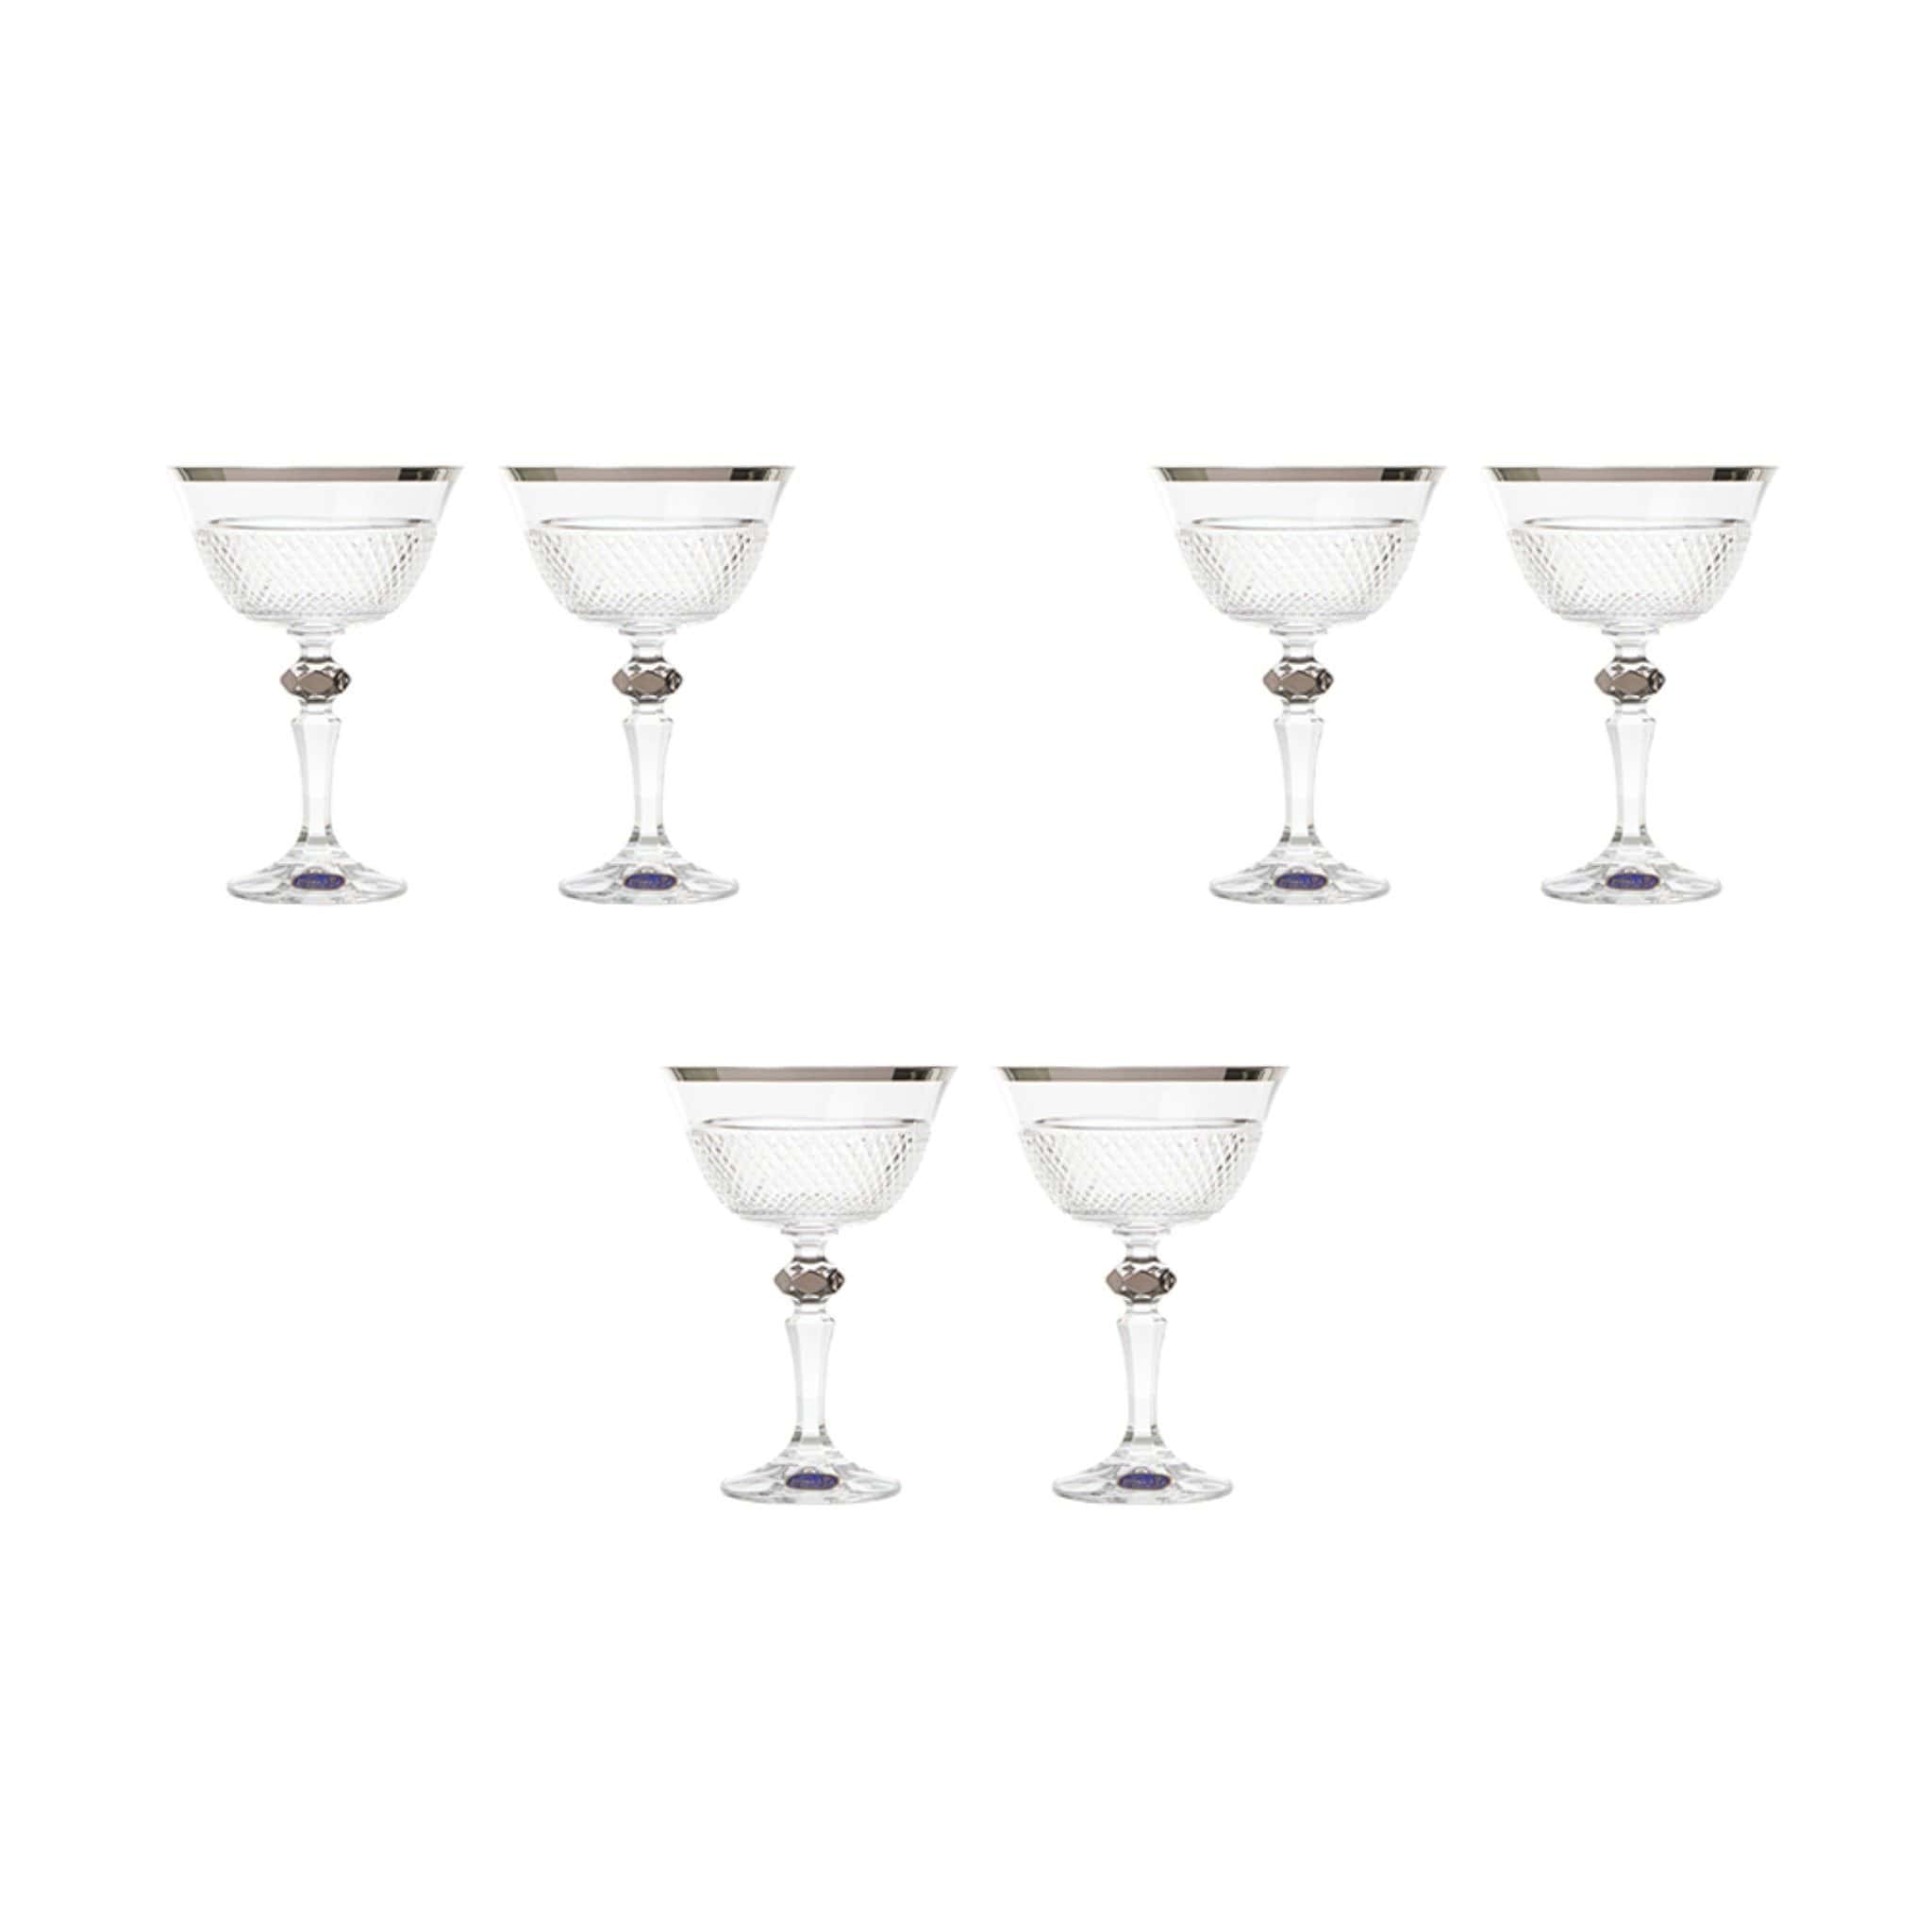 Bohemia Crystal - Cocktail Glass Set 6 Pieces - Silver - 180ml - 39000679